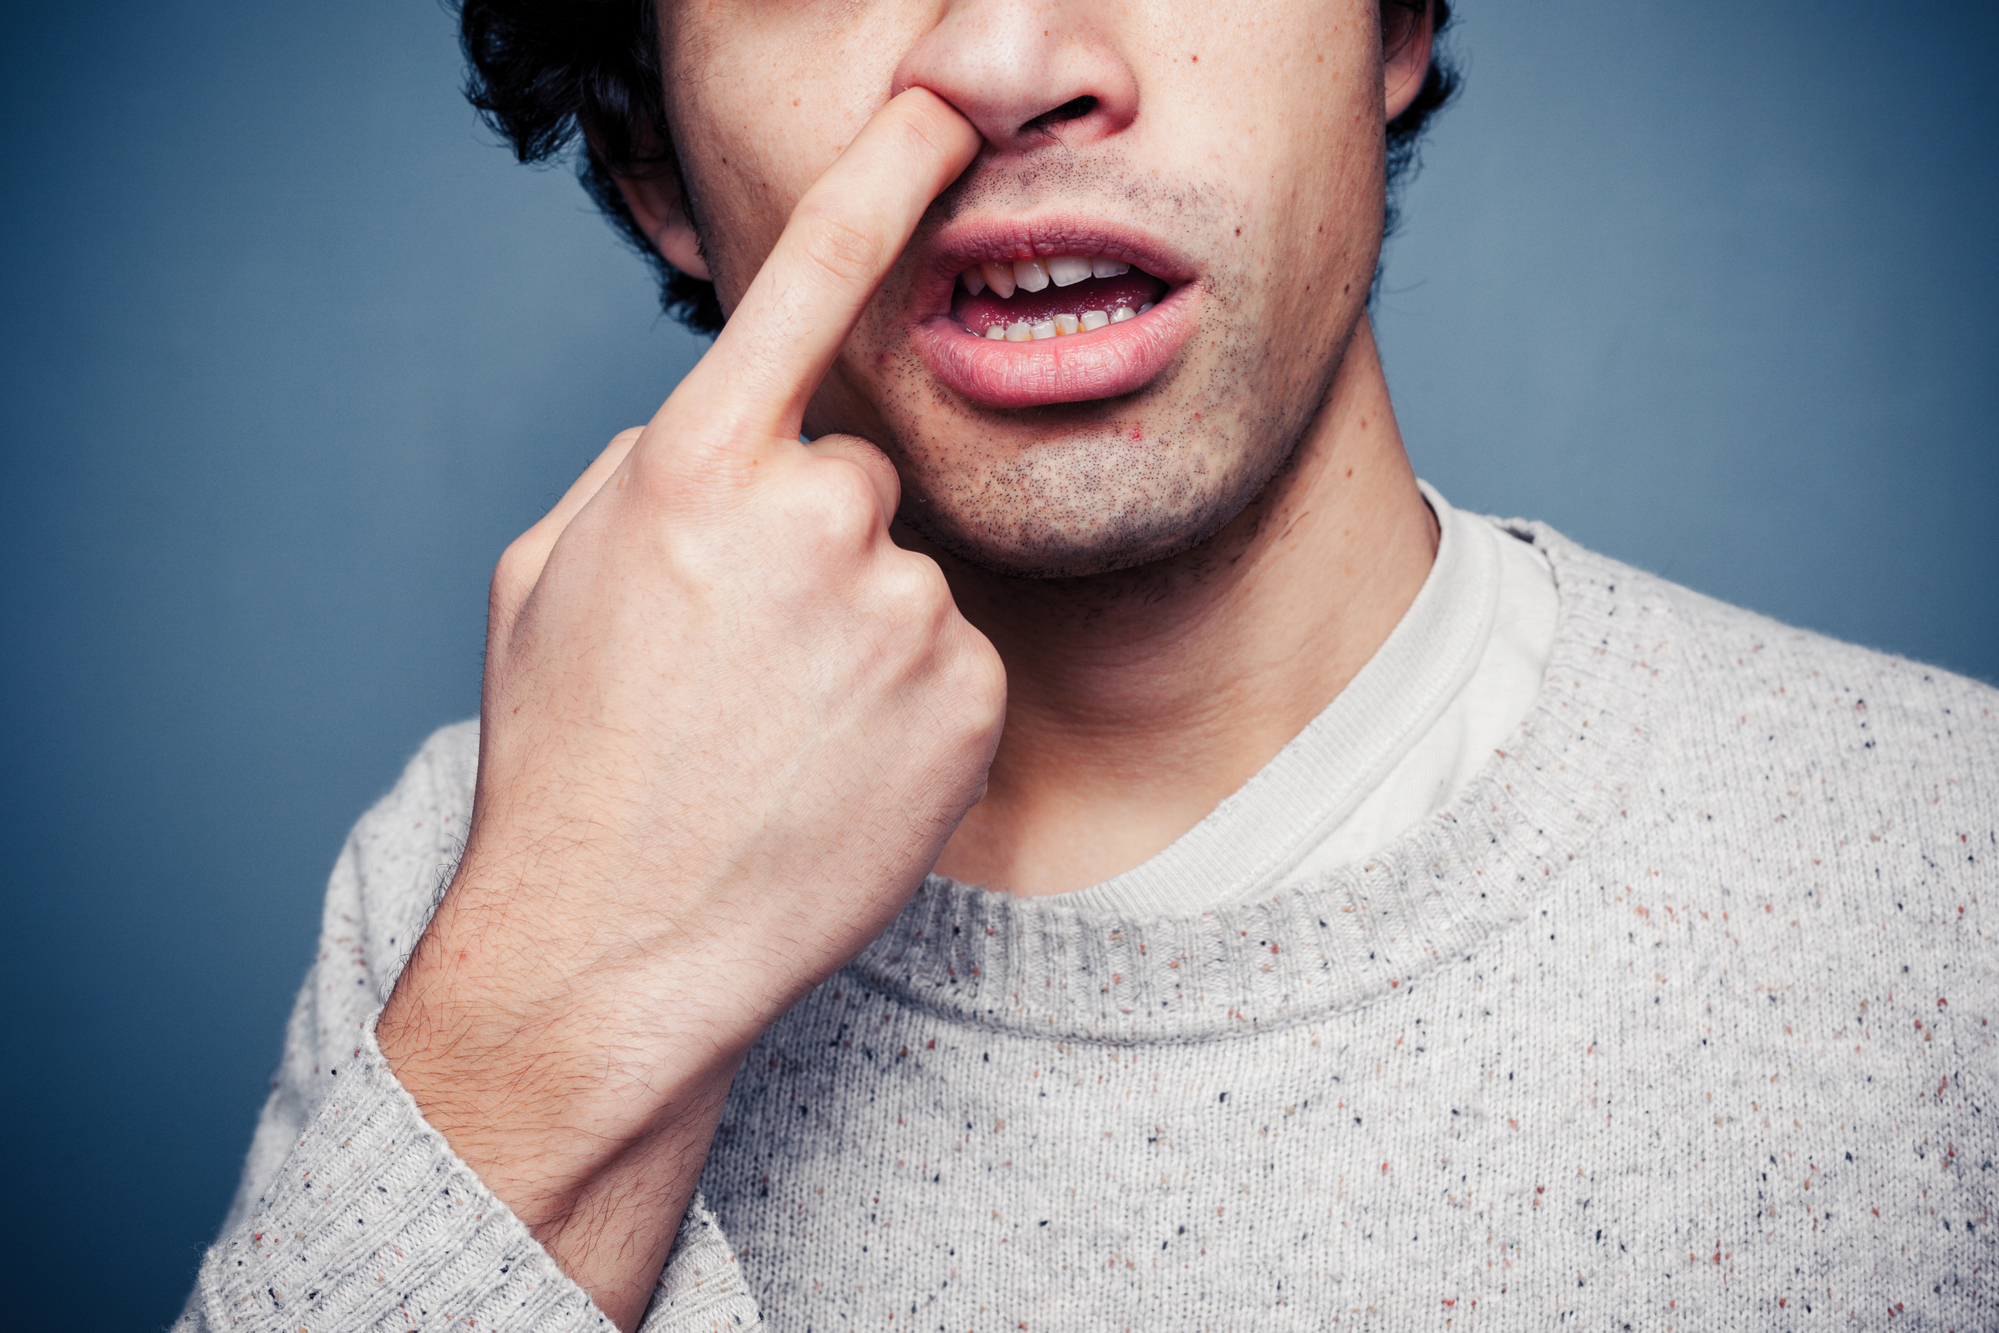 A person with dark curly hair and wearing a grey speckled sweater is picking their nose with their right index finger while partially opening their mouth. The background is a plain blue wall.